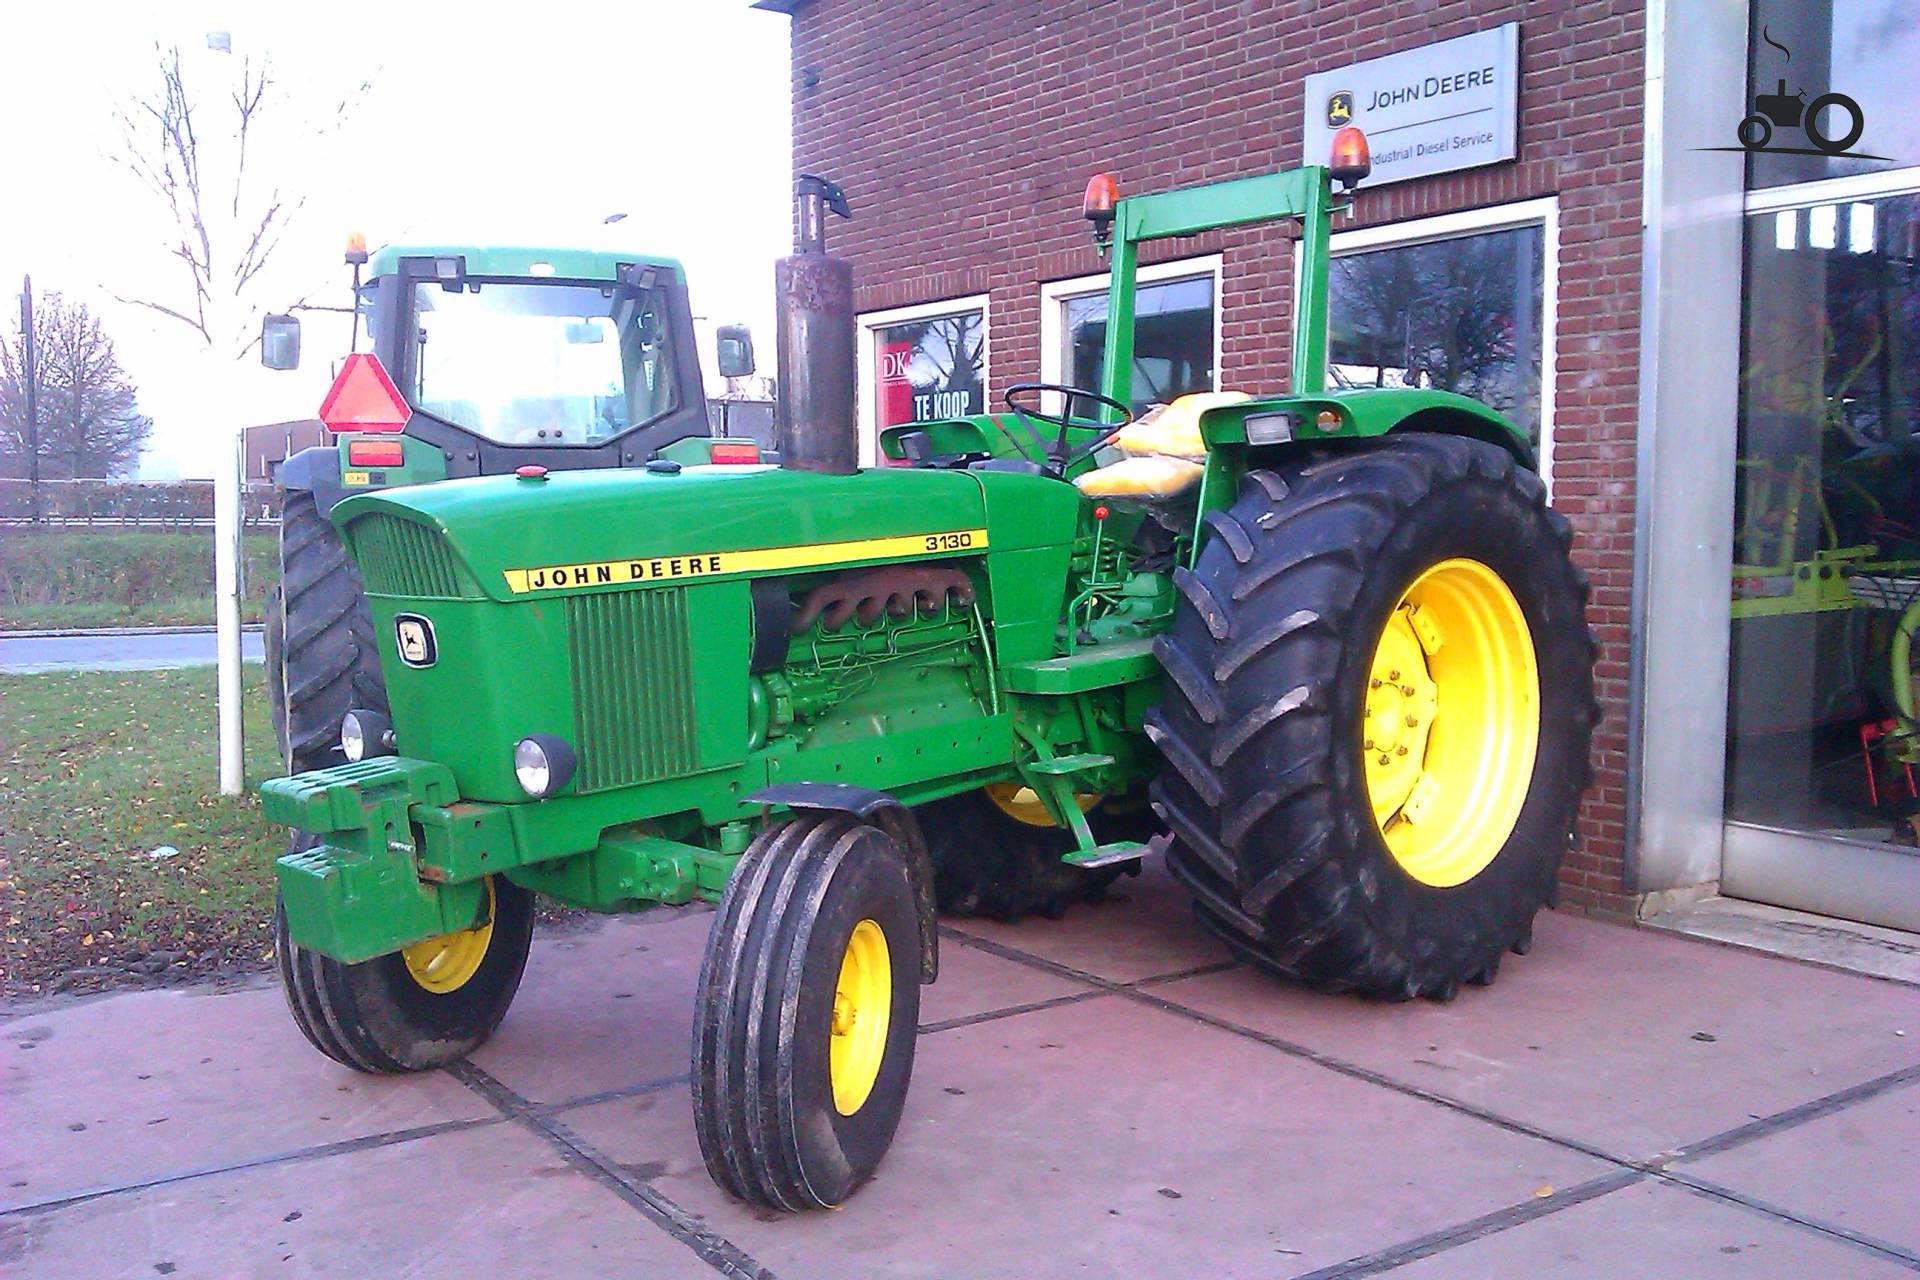 Related image with John Deere 3130